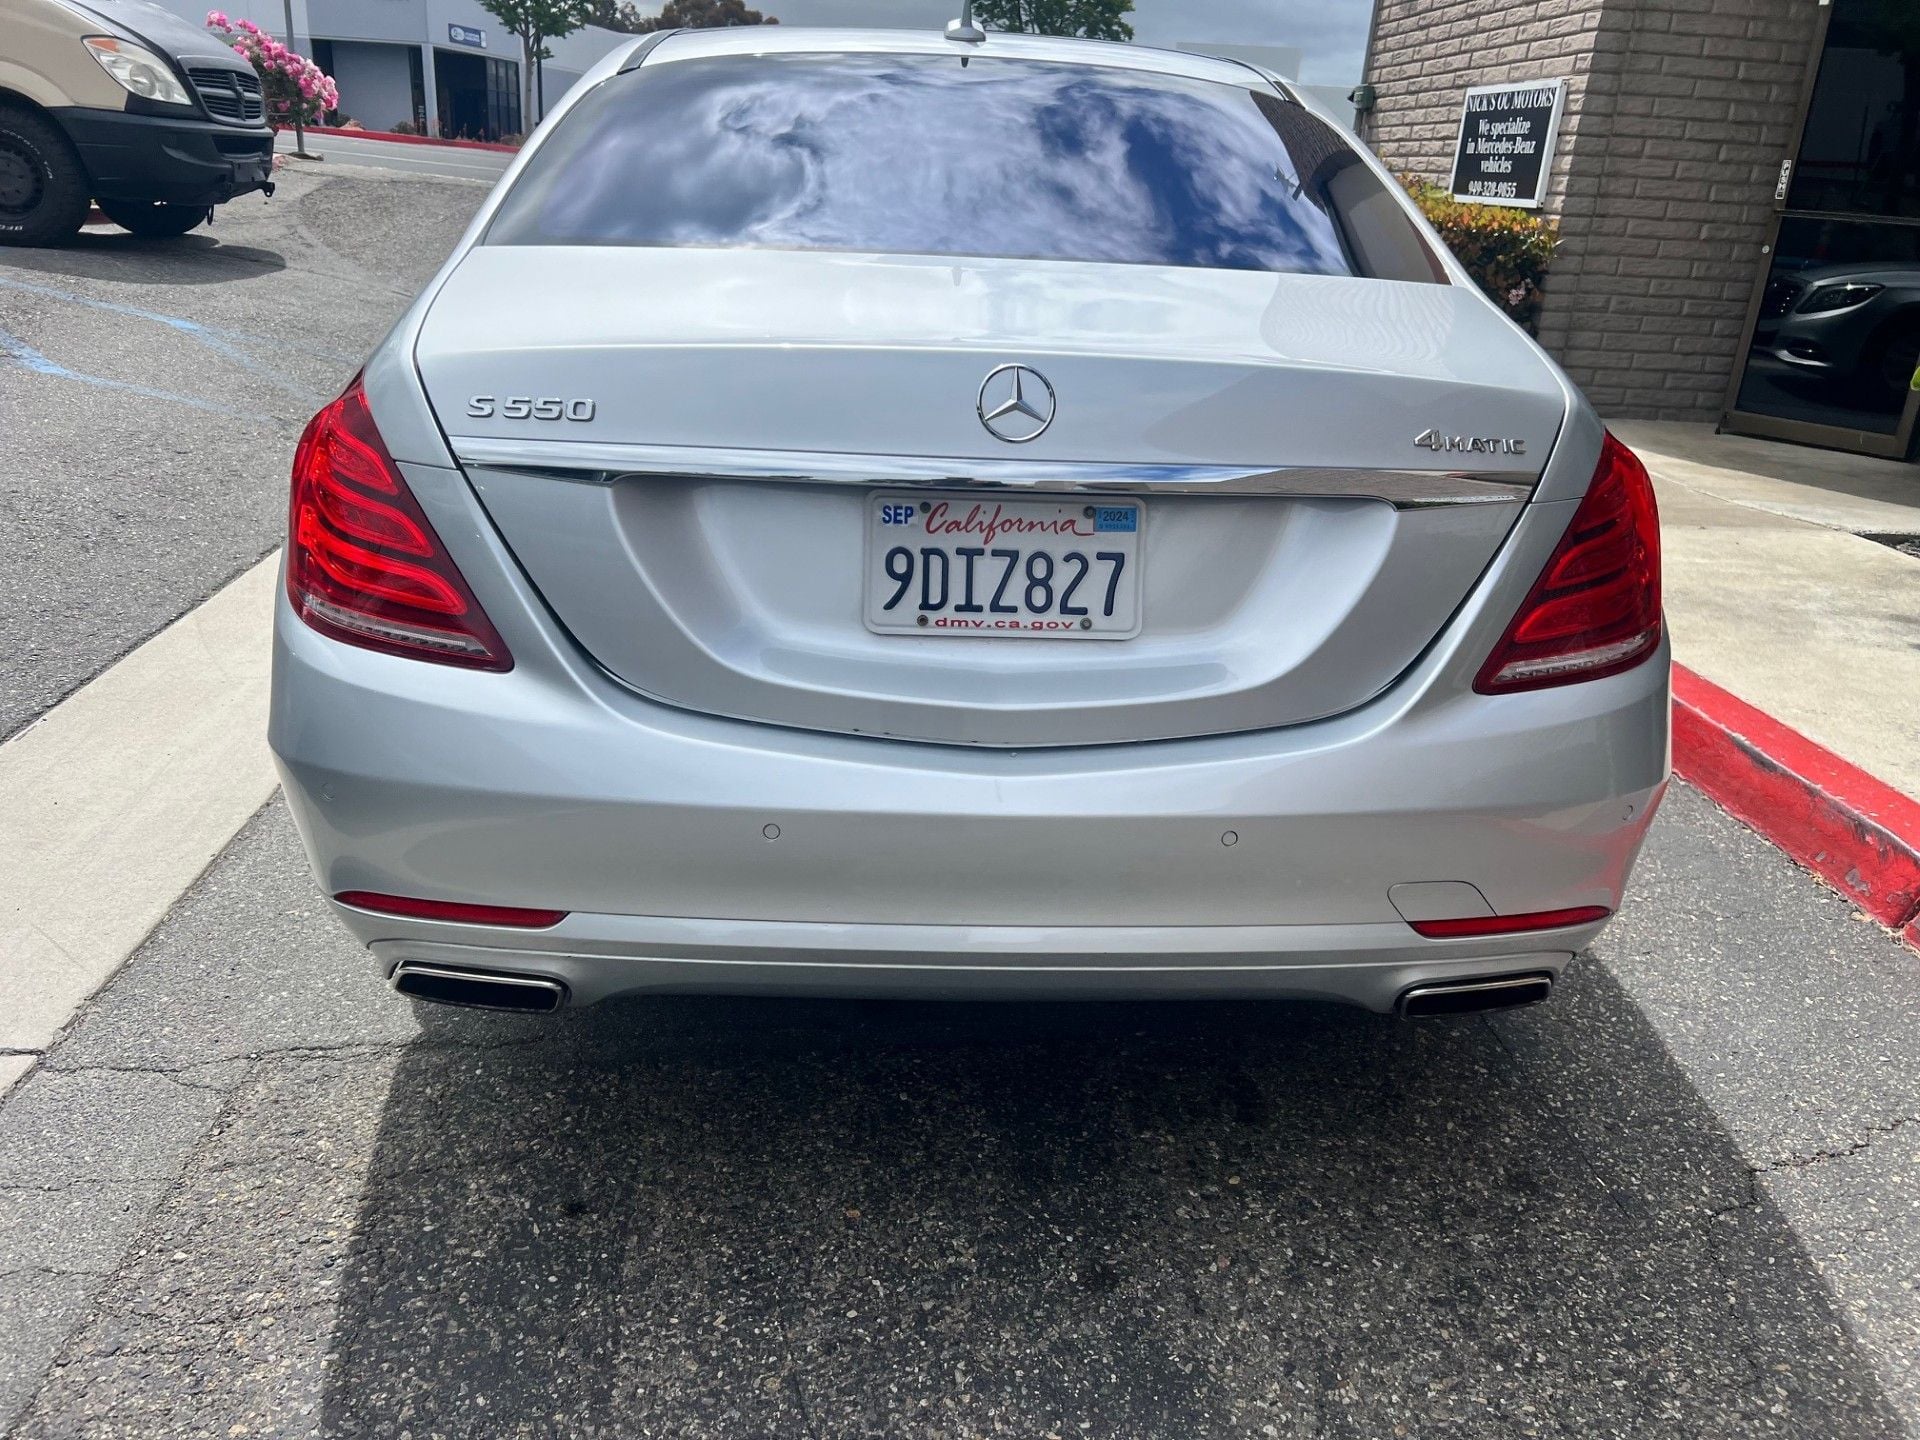 2017 Mercedes-Benz S550 - 2017 S 550 4m highly optioned, MB Master Tech Owned - Used - VIN WDDUG8FB9HA319705 - 51,900 Miles - 8 cyl - AWD - Automatic - Sedan - Silver - Mission Viejo, CA 92691, United States